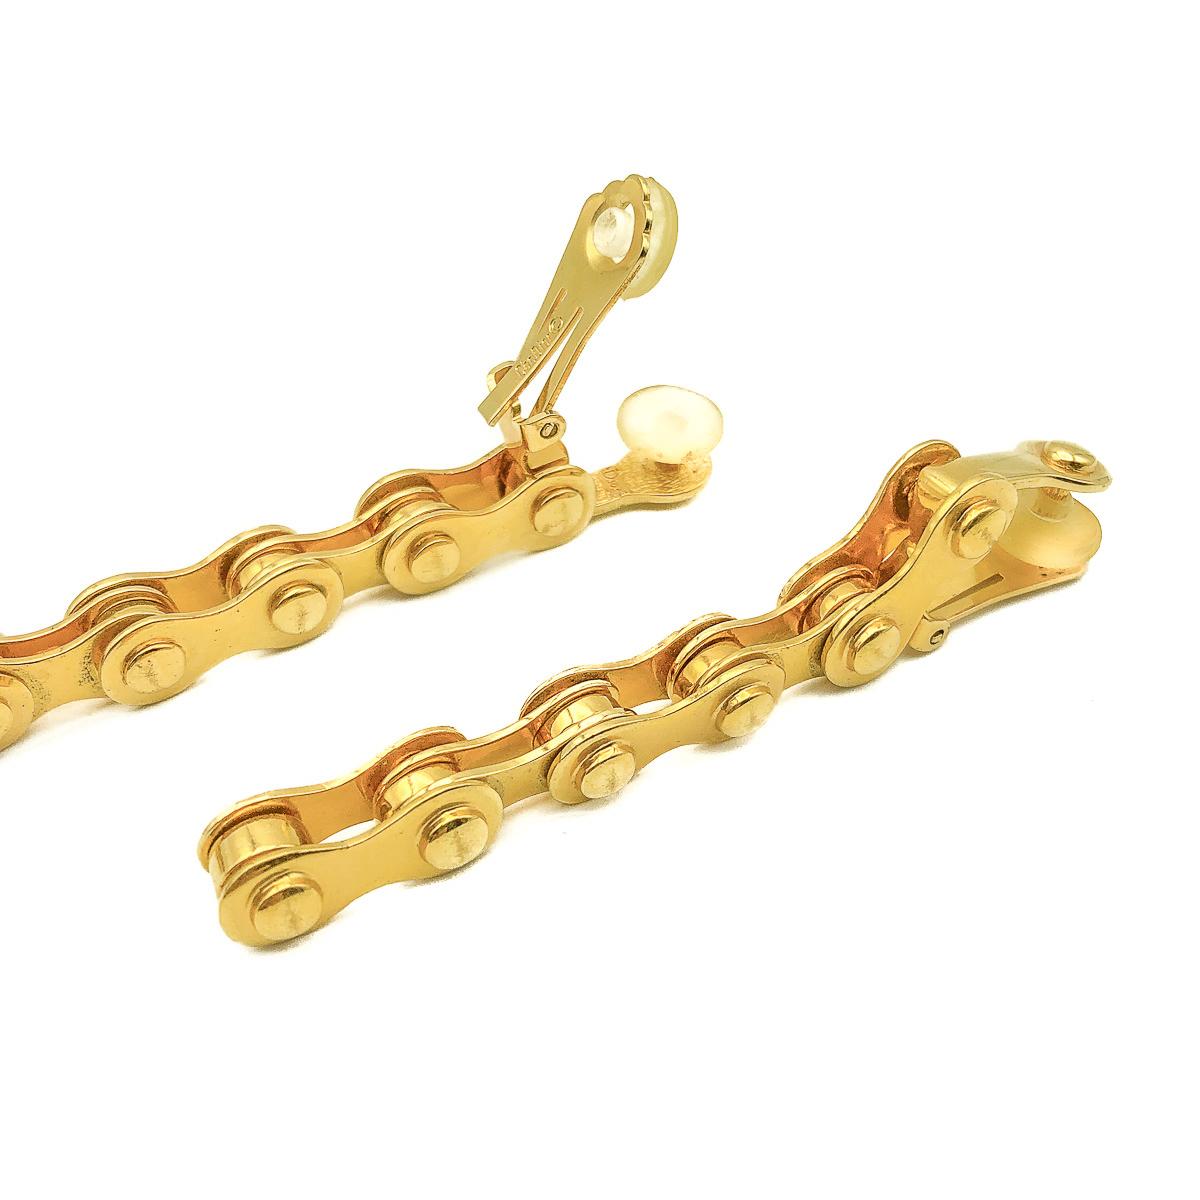 A legendary piece of Dior by Galliano. Our Galliano Bike Chain Earrings. Crafted in gold plated metal. Created for the much adored Fall 2000 collection. Featuring a long drop in a articulated bike chain style. In very good vintage condition. Signed.